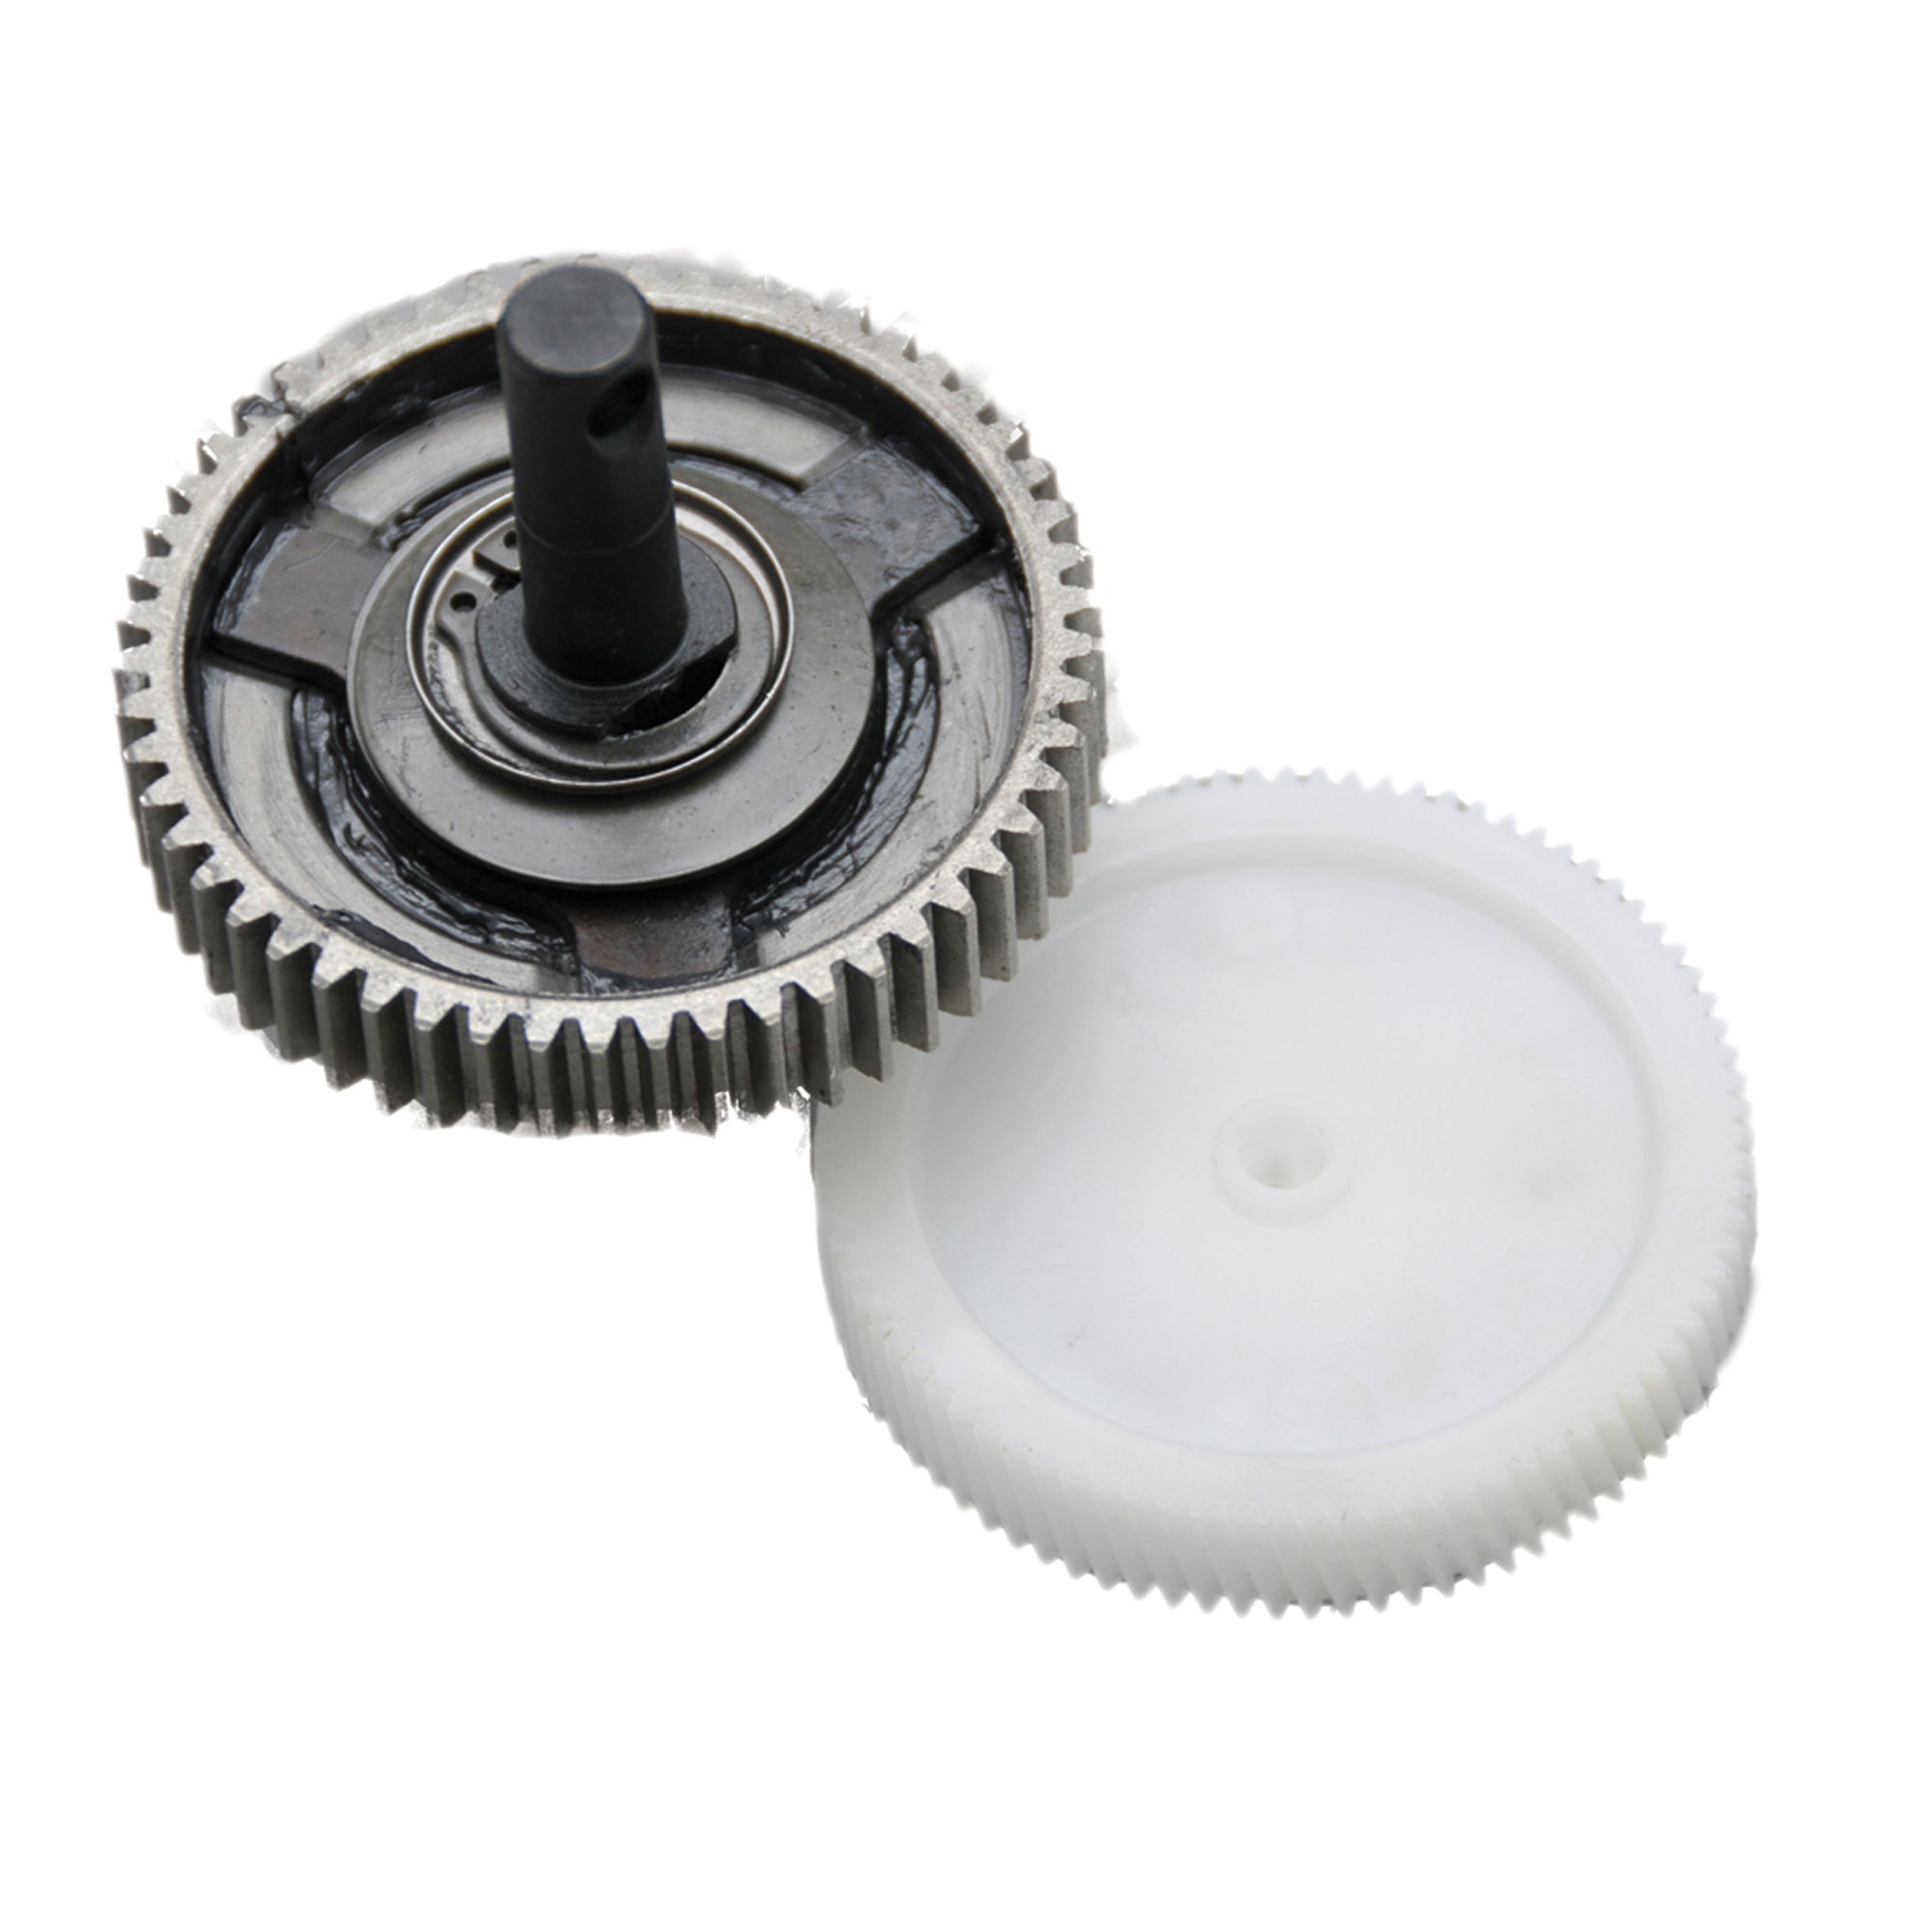 AP Products 014-191072 Venture Replacement Gear Set - 18:1